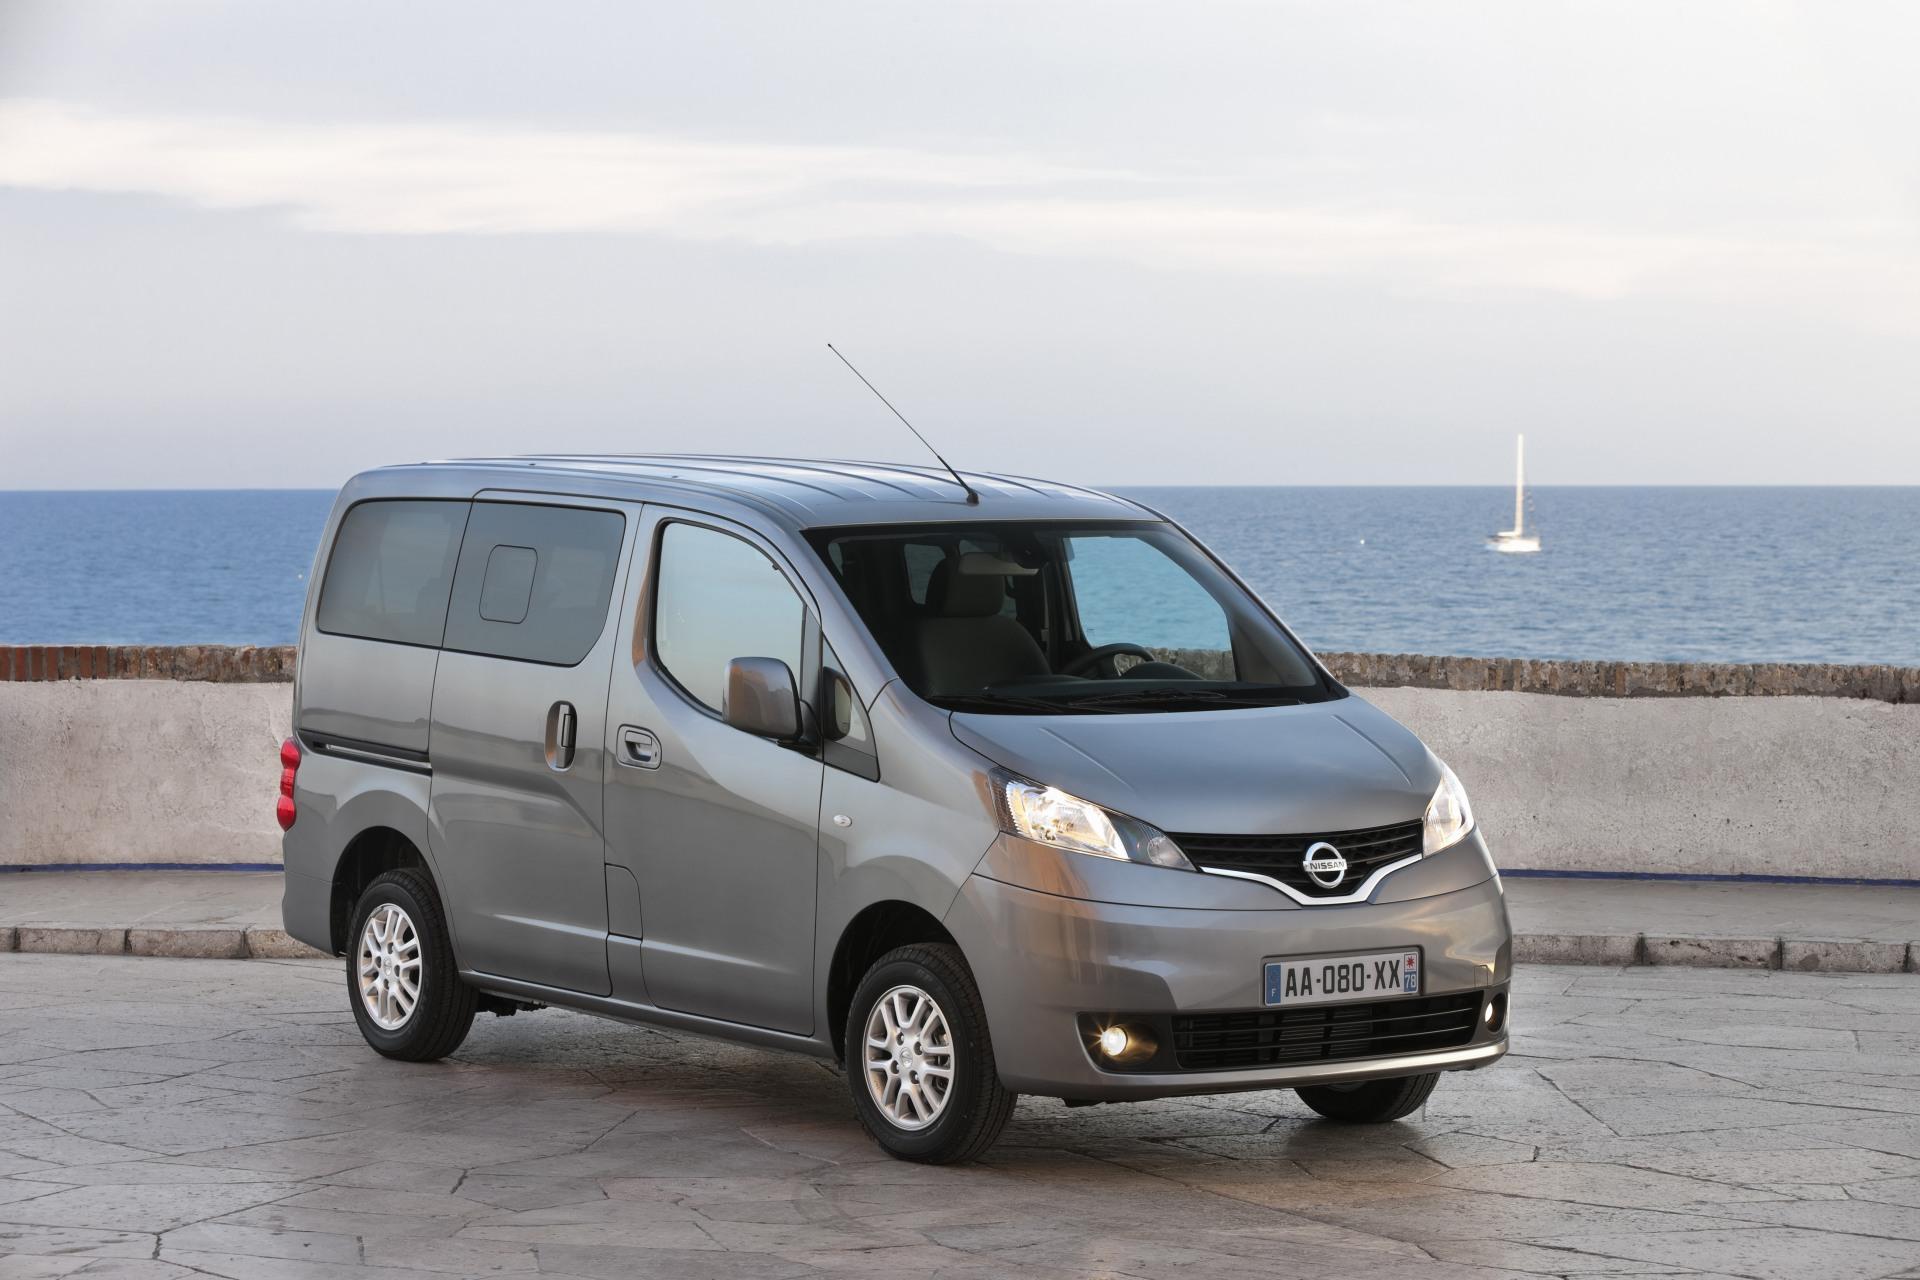 NV200, Features